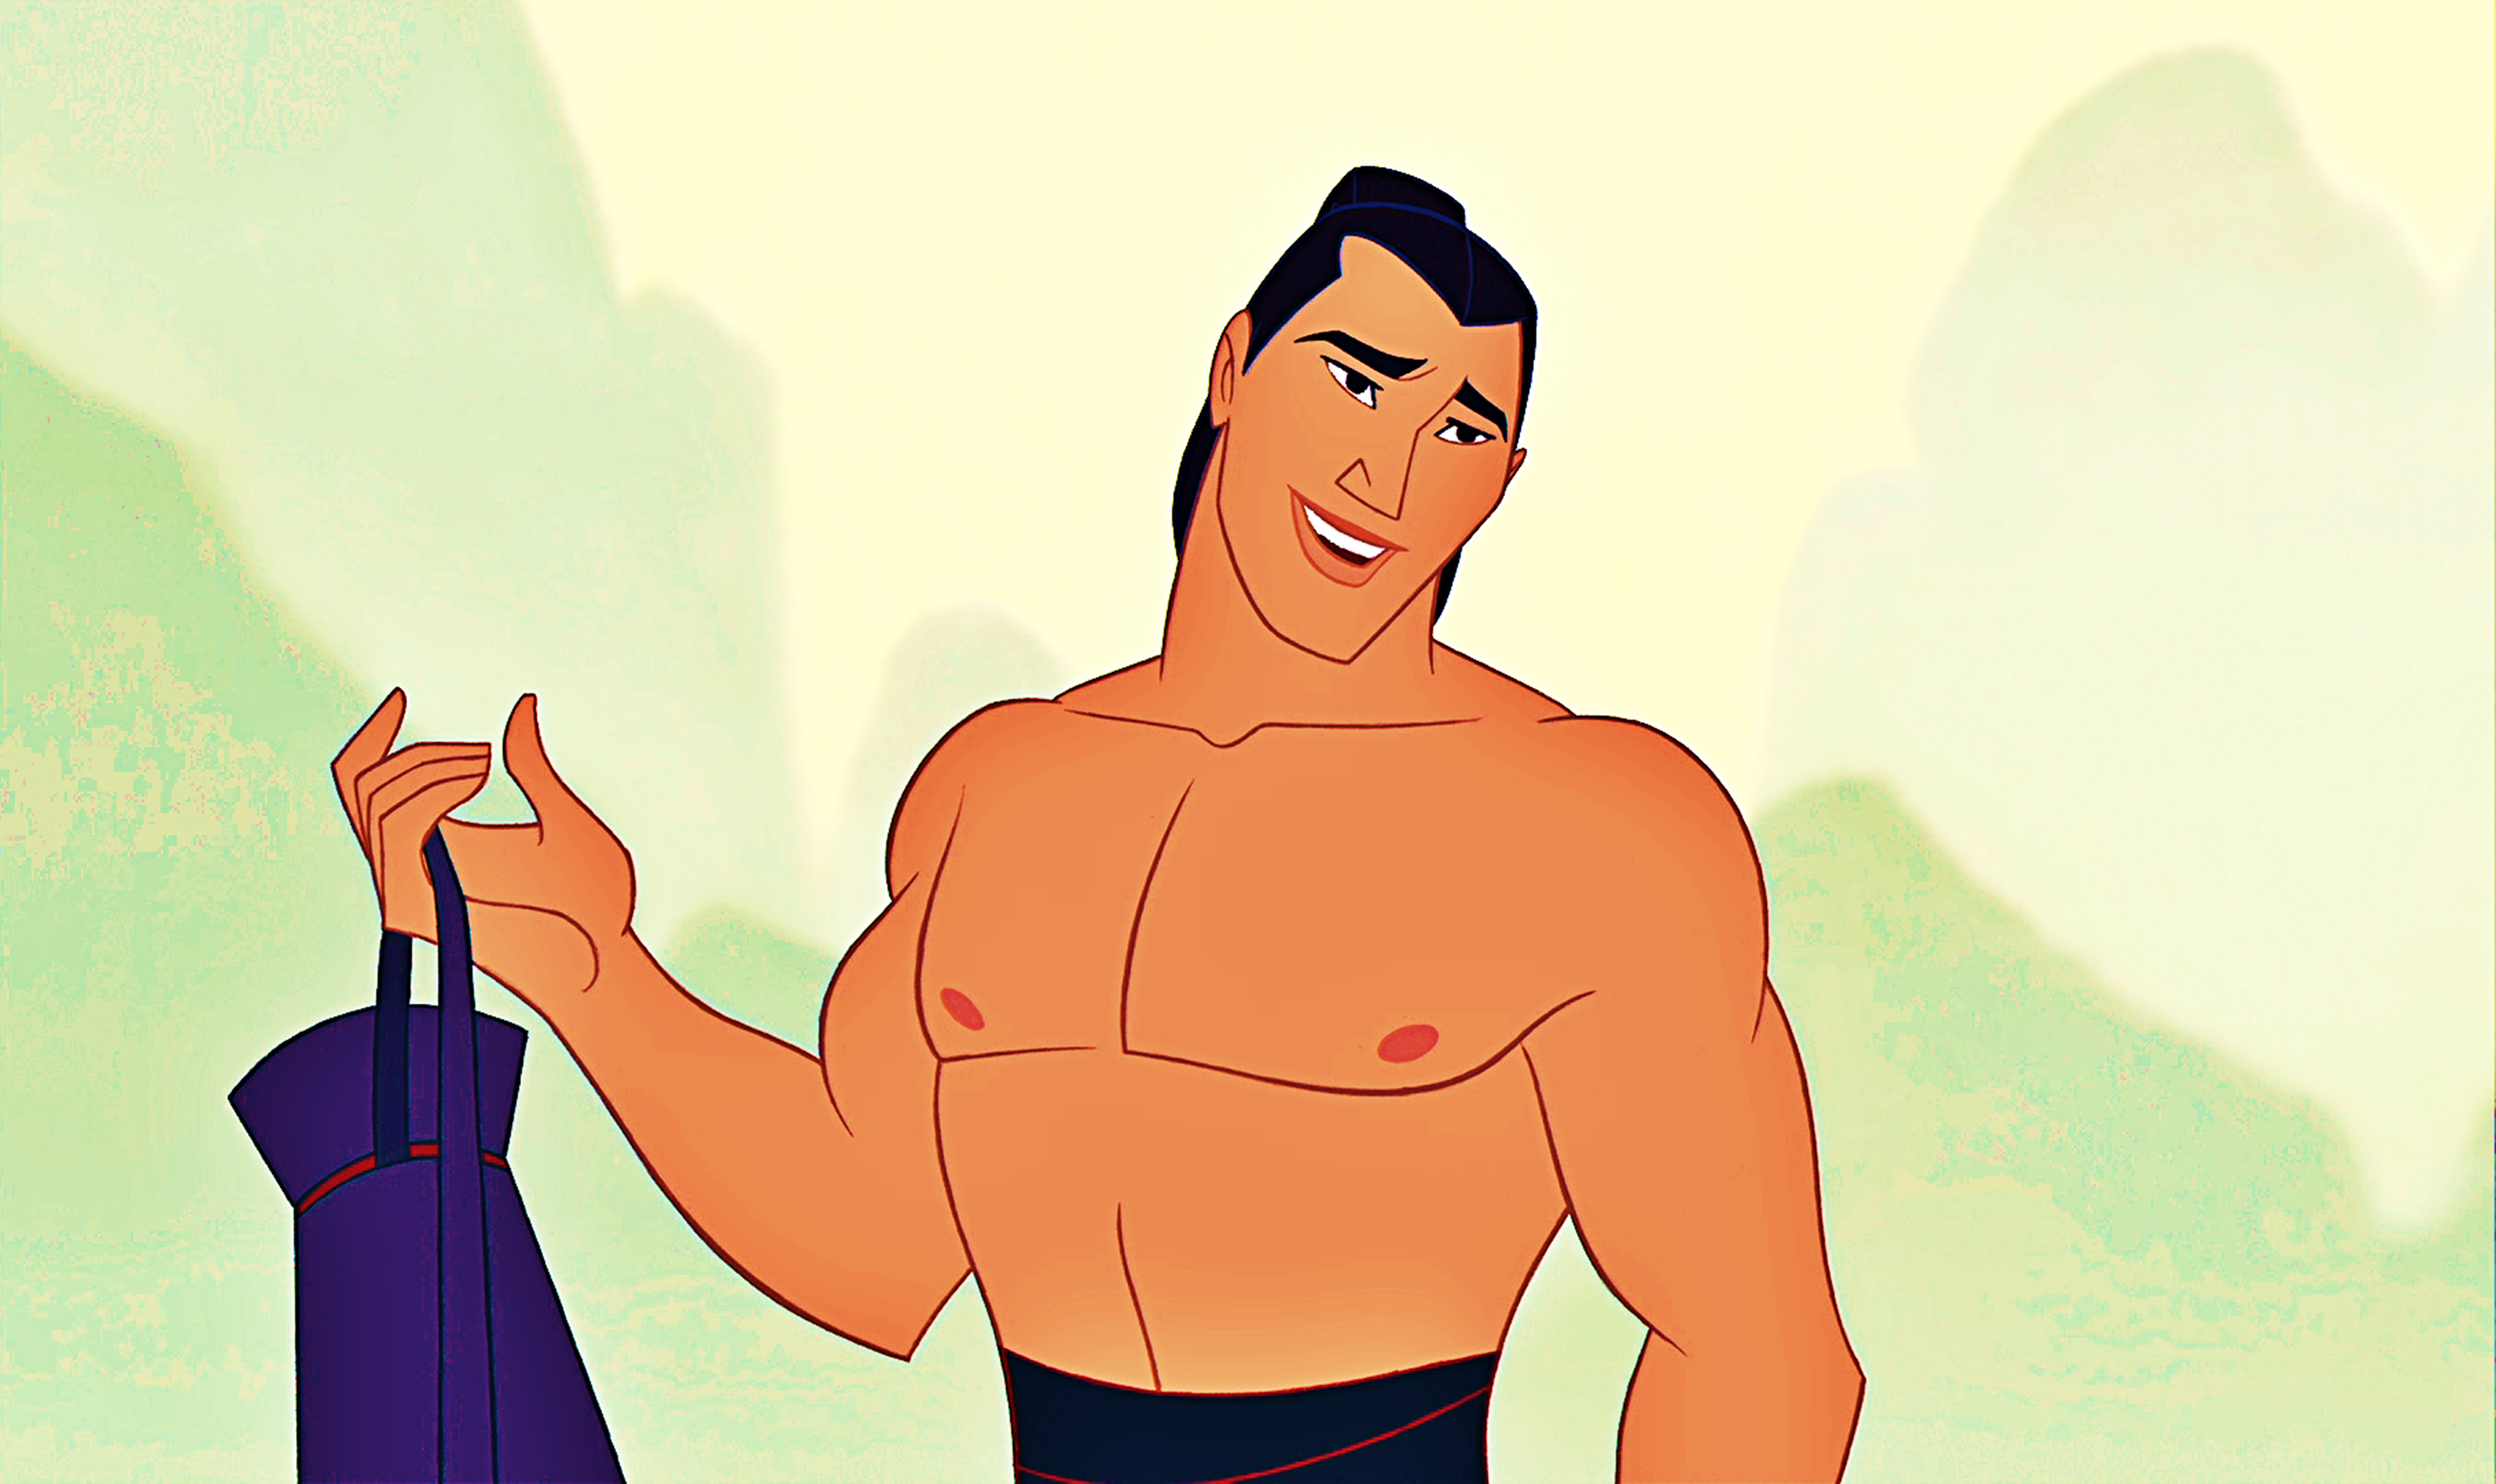 25 Hot Animated Characters From Movies and TV Shows - The Hottest Cartoons